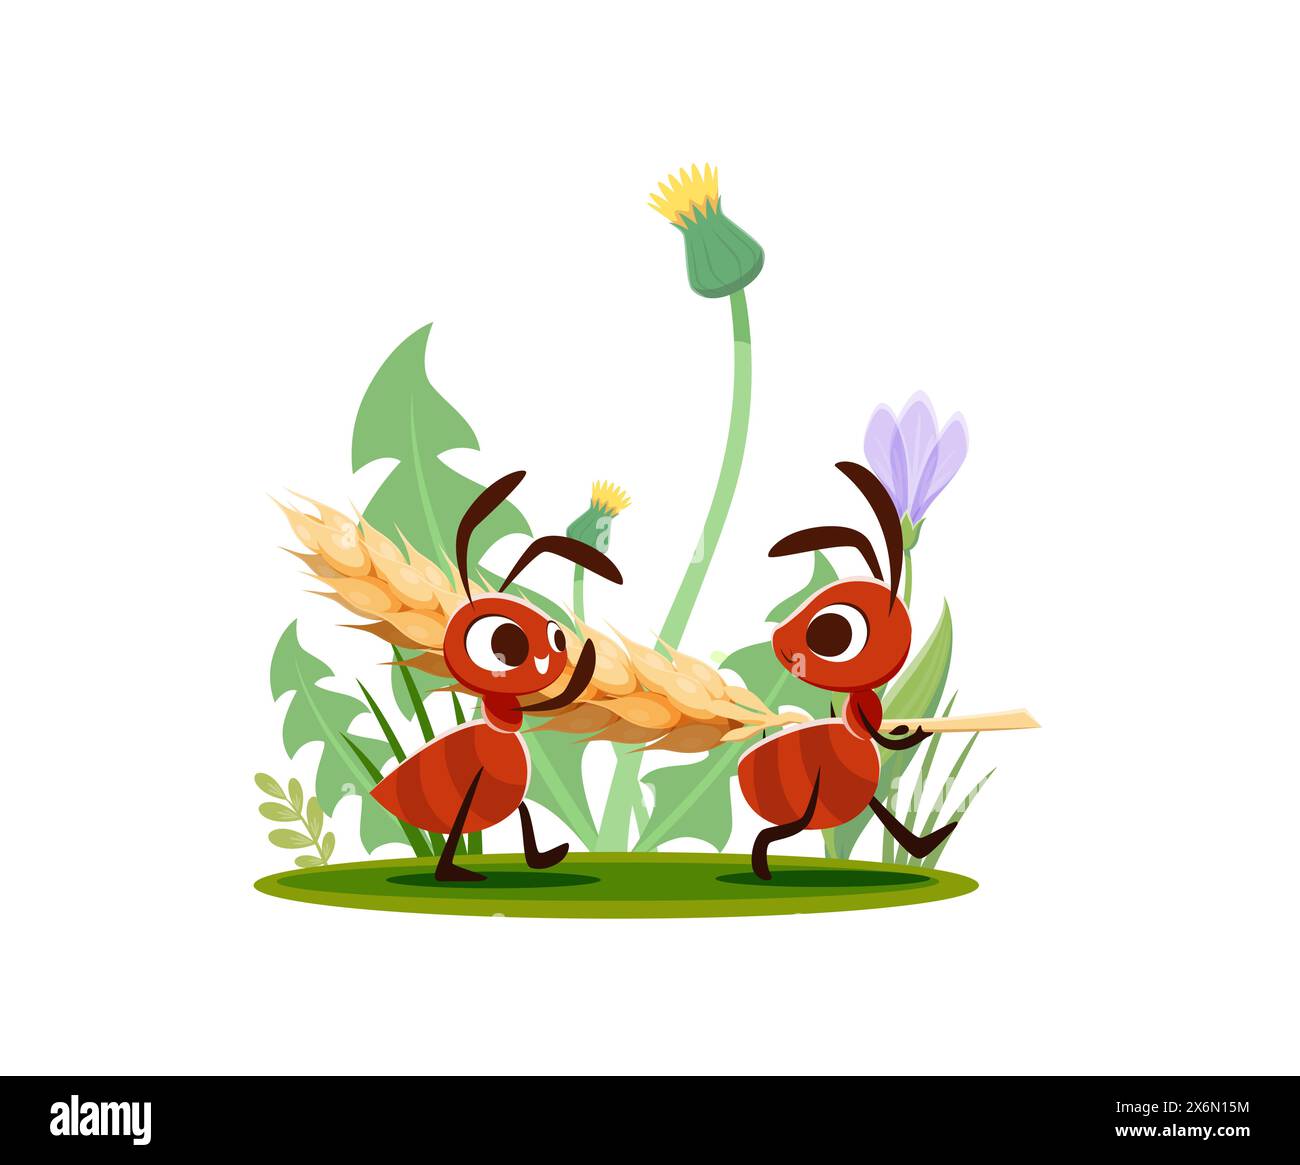 Cartoon ants carry wheat ear for food in meadow grass, vector funny insect characters. Happy ants carrying wheat spikelet to anthill nest walking among field flowers, child cartoon illustration Stock Vector